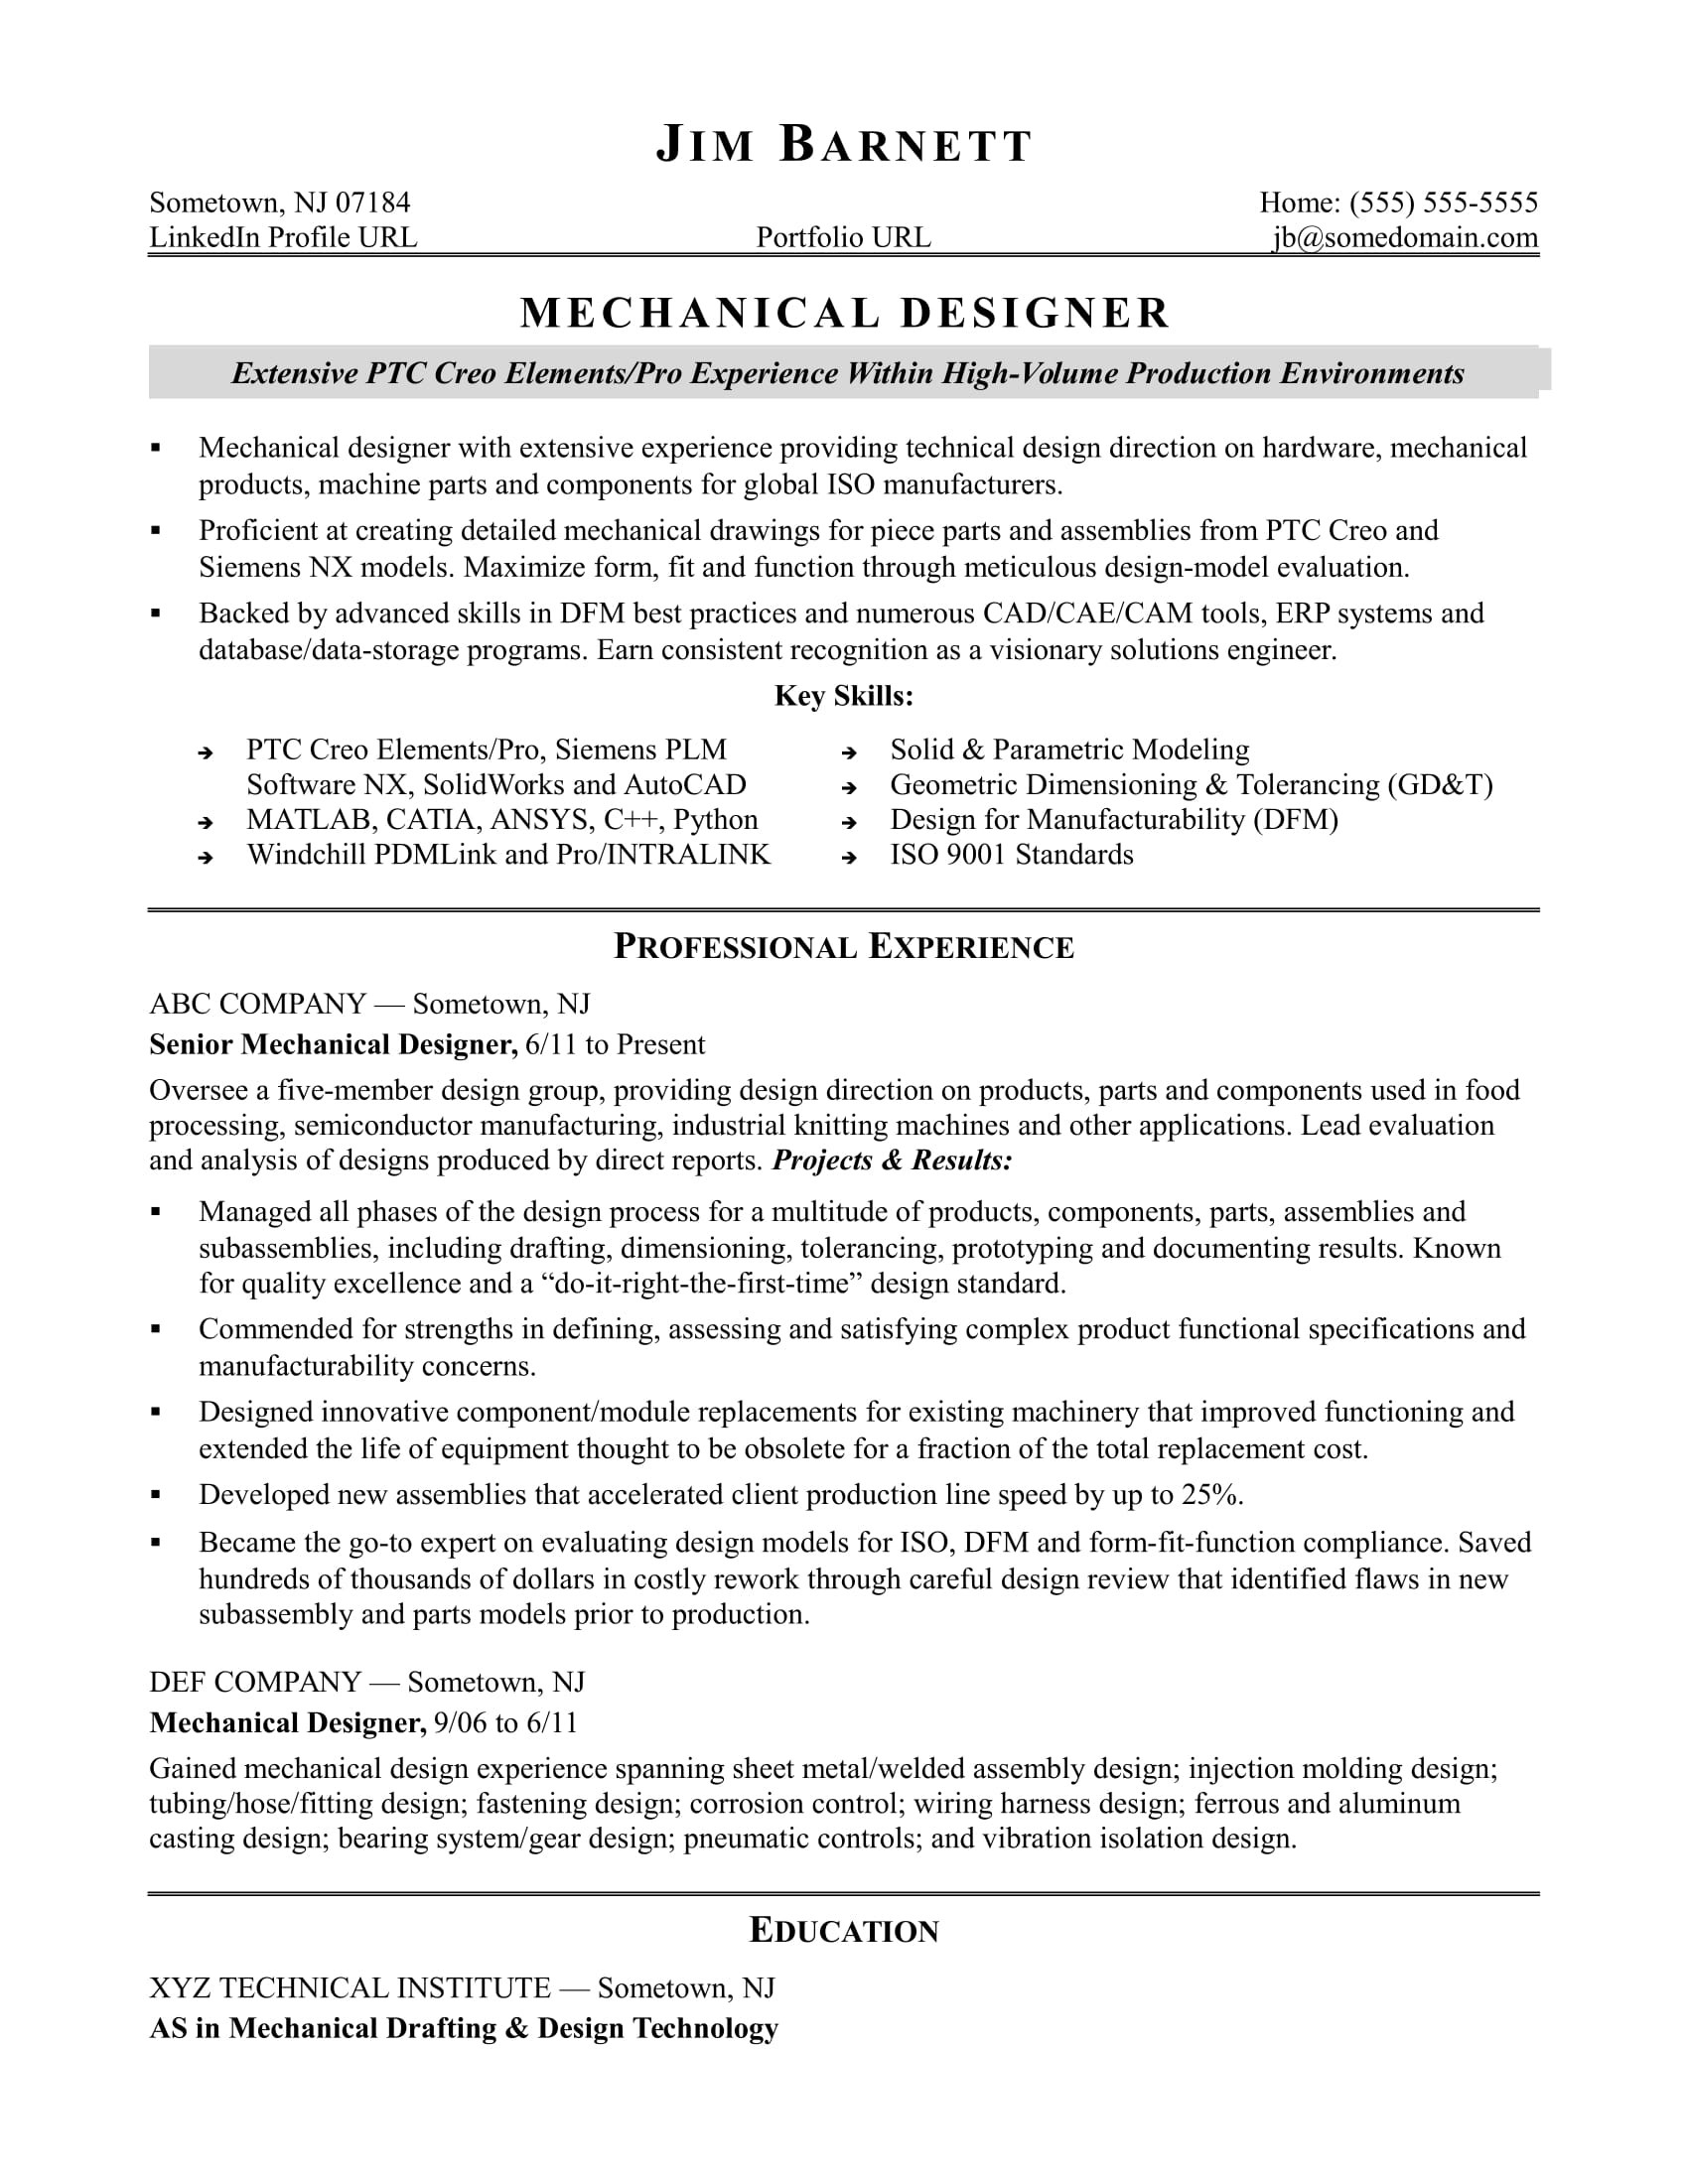 Resume Samples Of Engineer with 2 Years Work Experience Sample Resume for An Experienced Mechanical Designer Monster.com